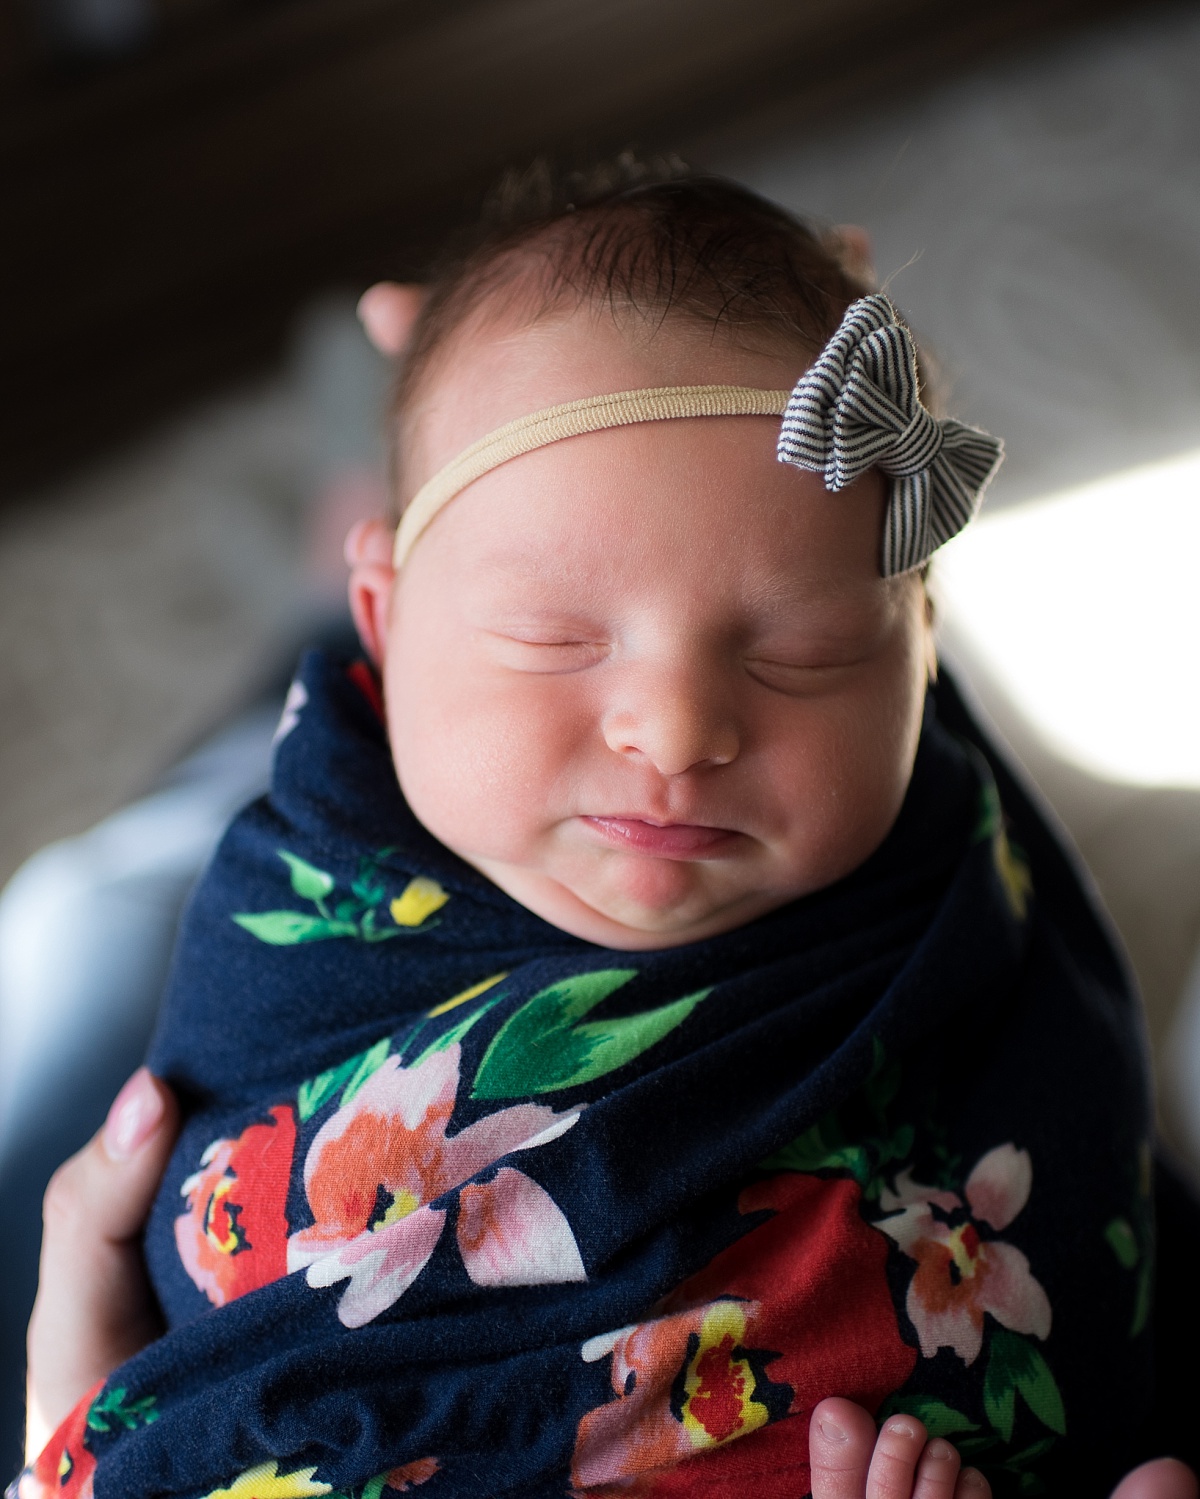 Newborn Girl swaddled in bright colors during newborn session by Erin Tetterton Photography